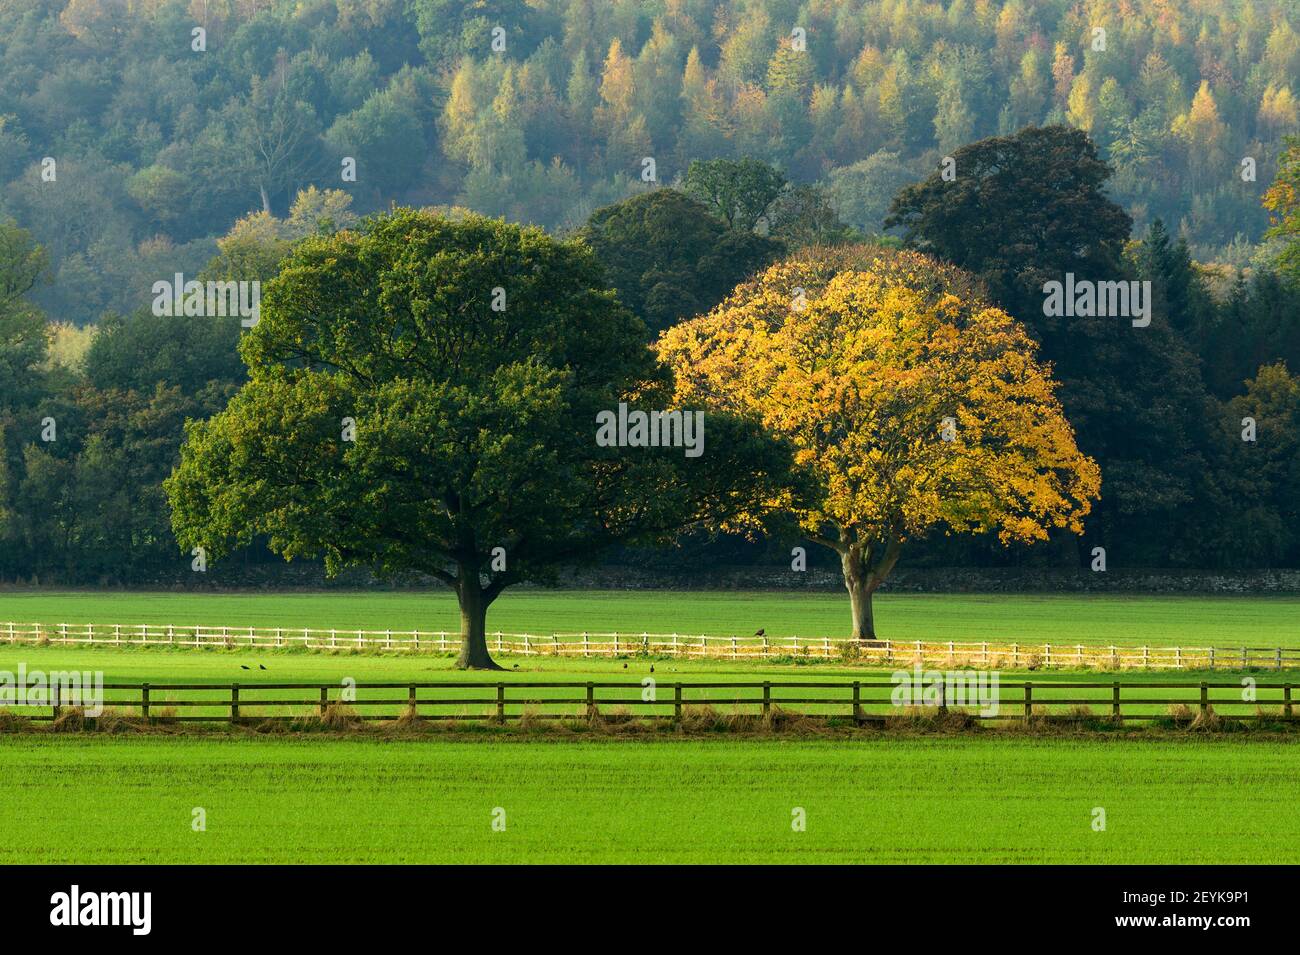 Scenic rural autumn landscape (contrasting trees in field - green tree & 1 with colourful autumnal leaves - different) - North Yorkshire, England UK Stock Photo